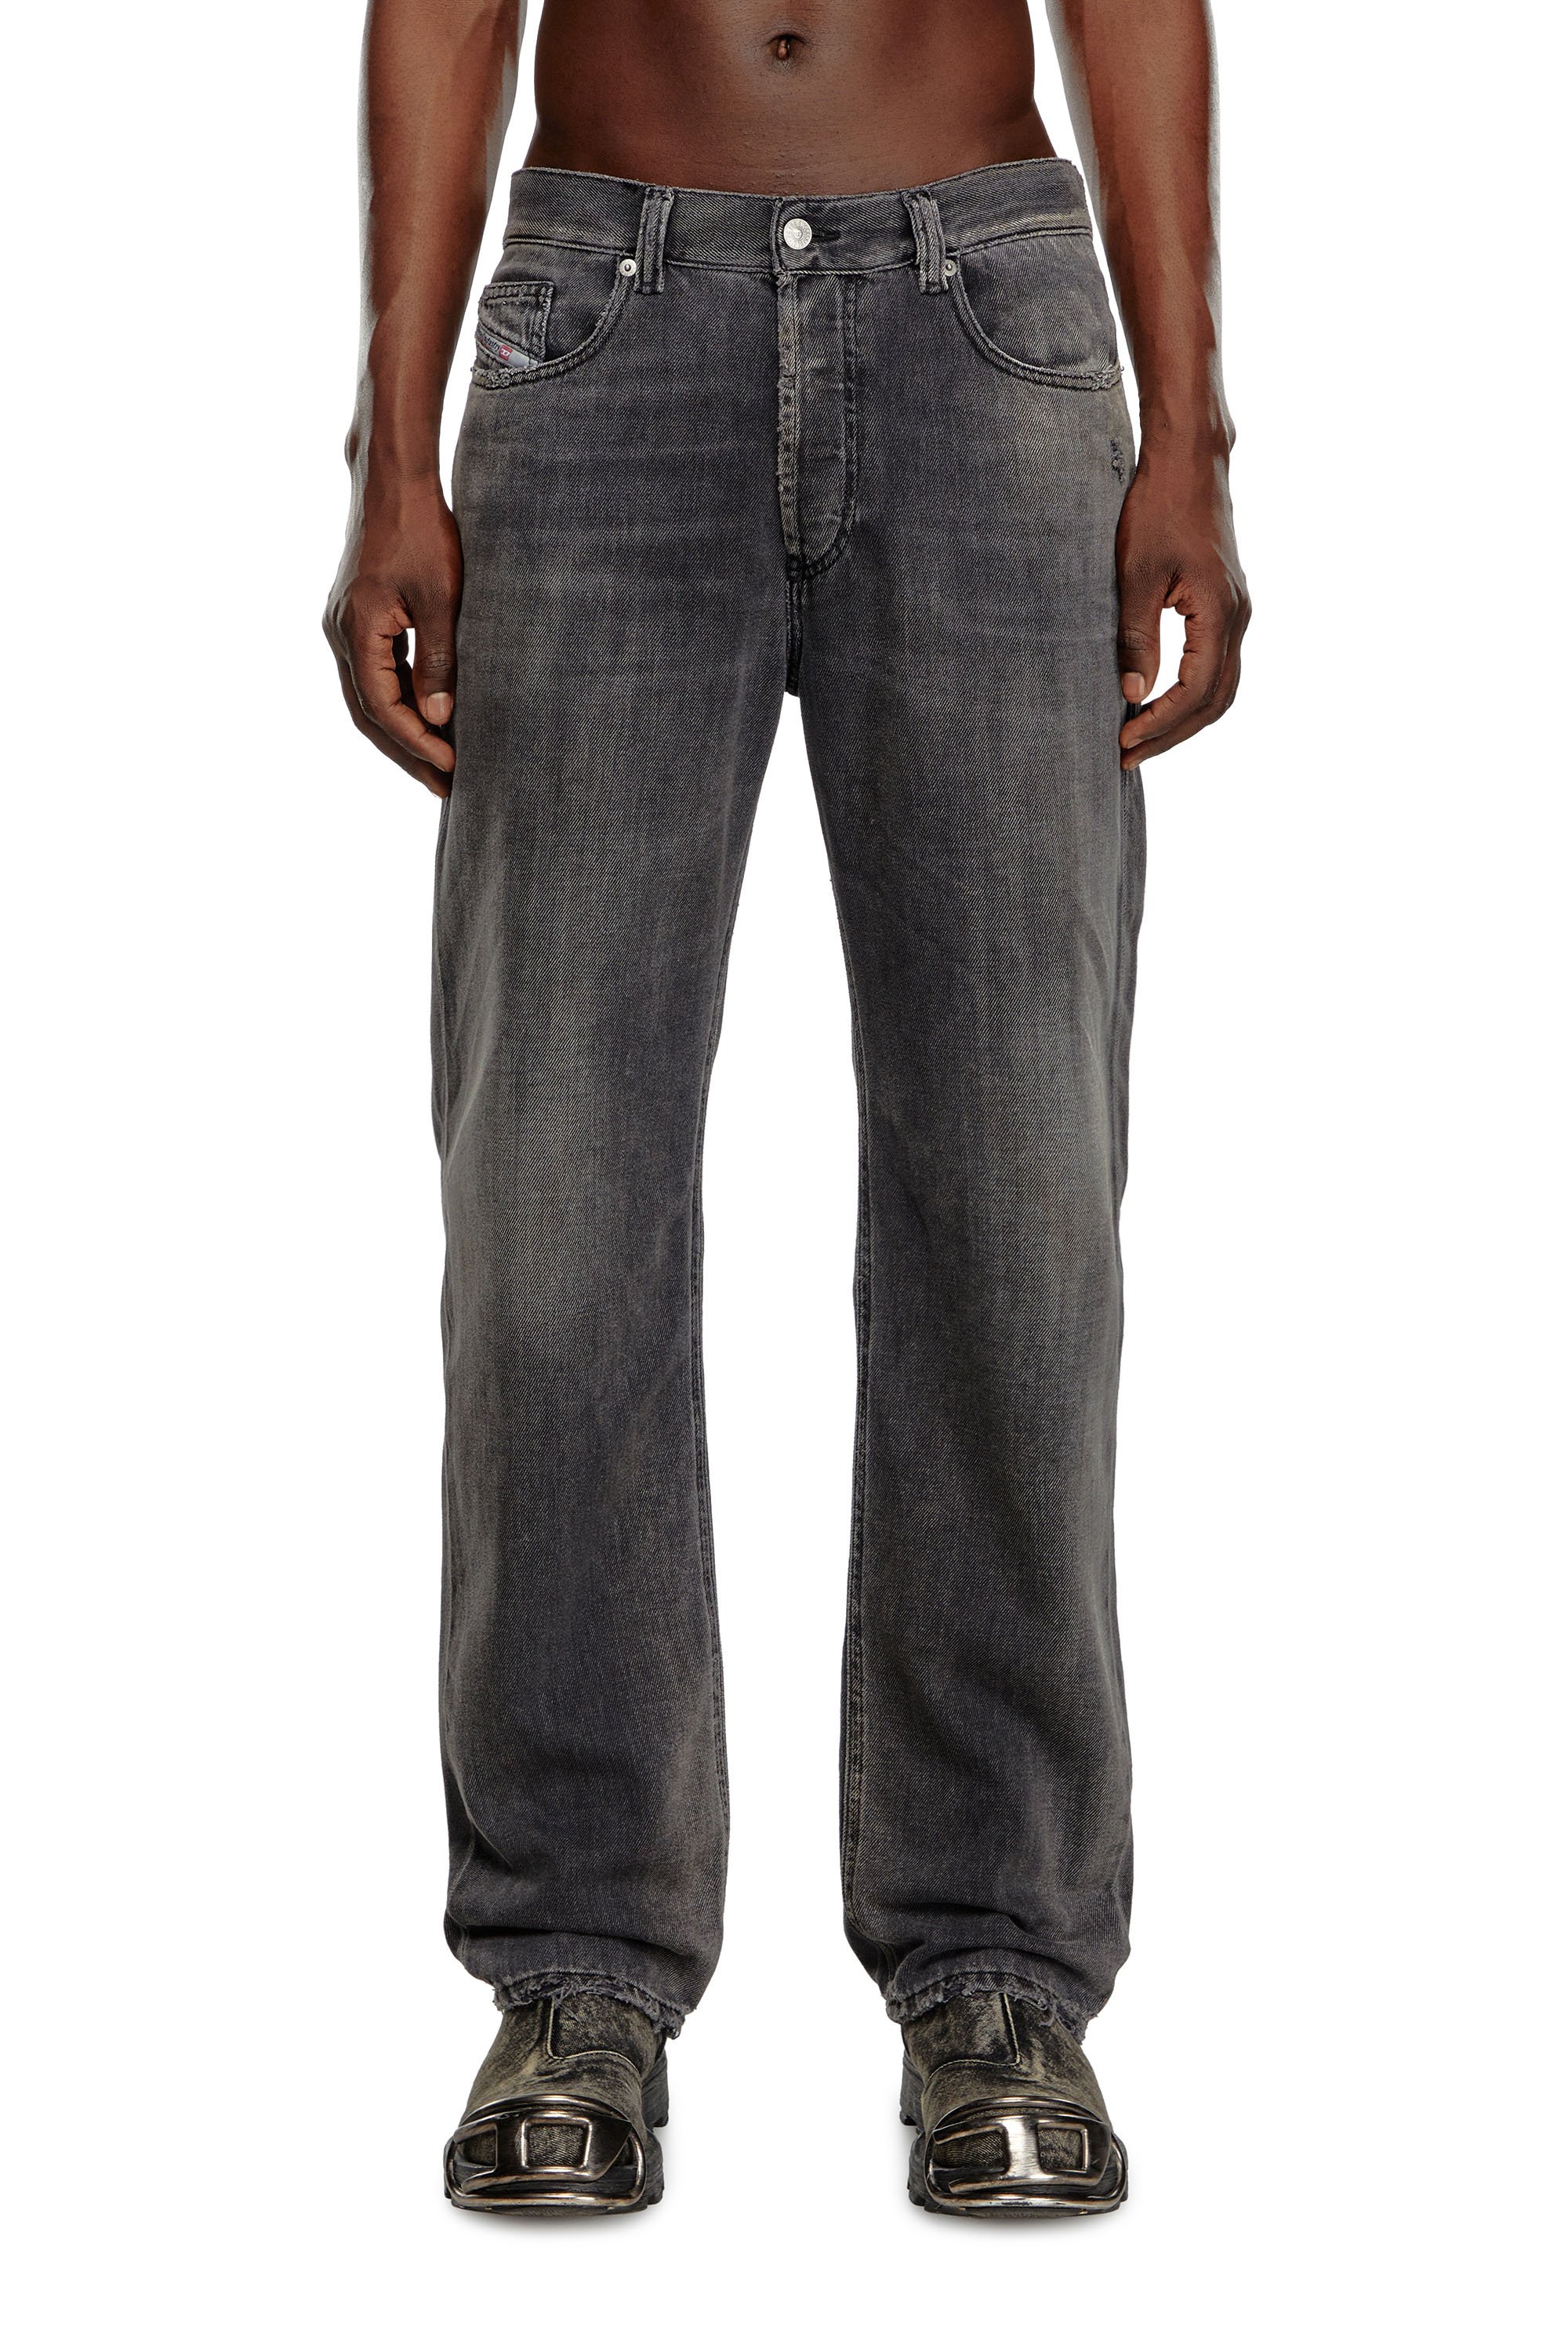 Diesel - Straight Jeans 2010 D-Macs 09K14, Hombre Straight Jeans - 2010 D-Macs in Negro - Image 2